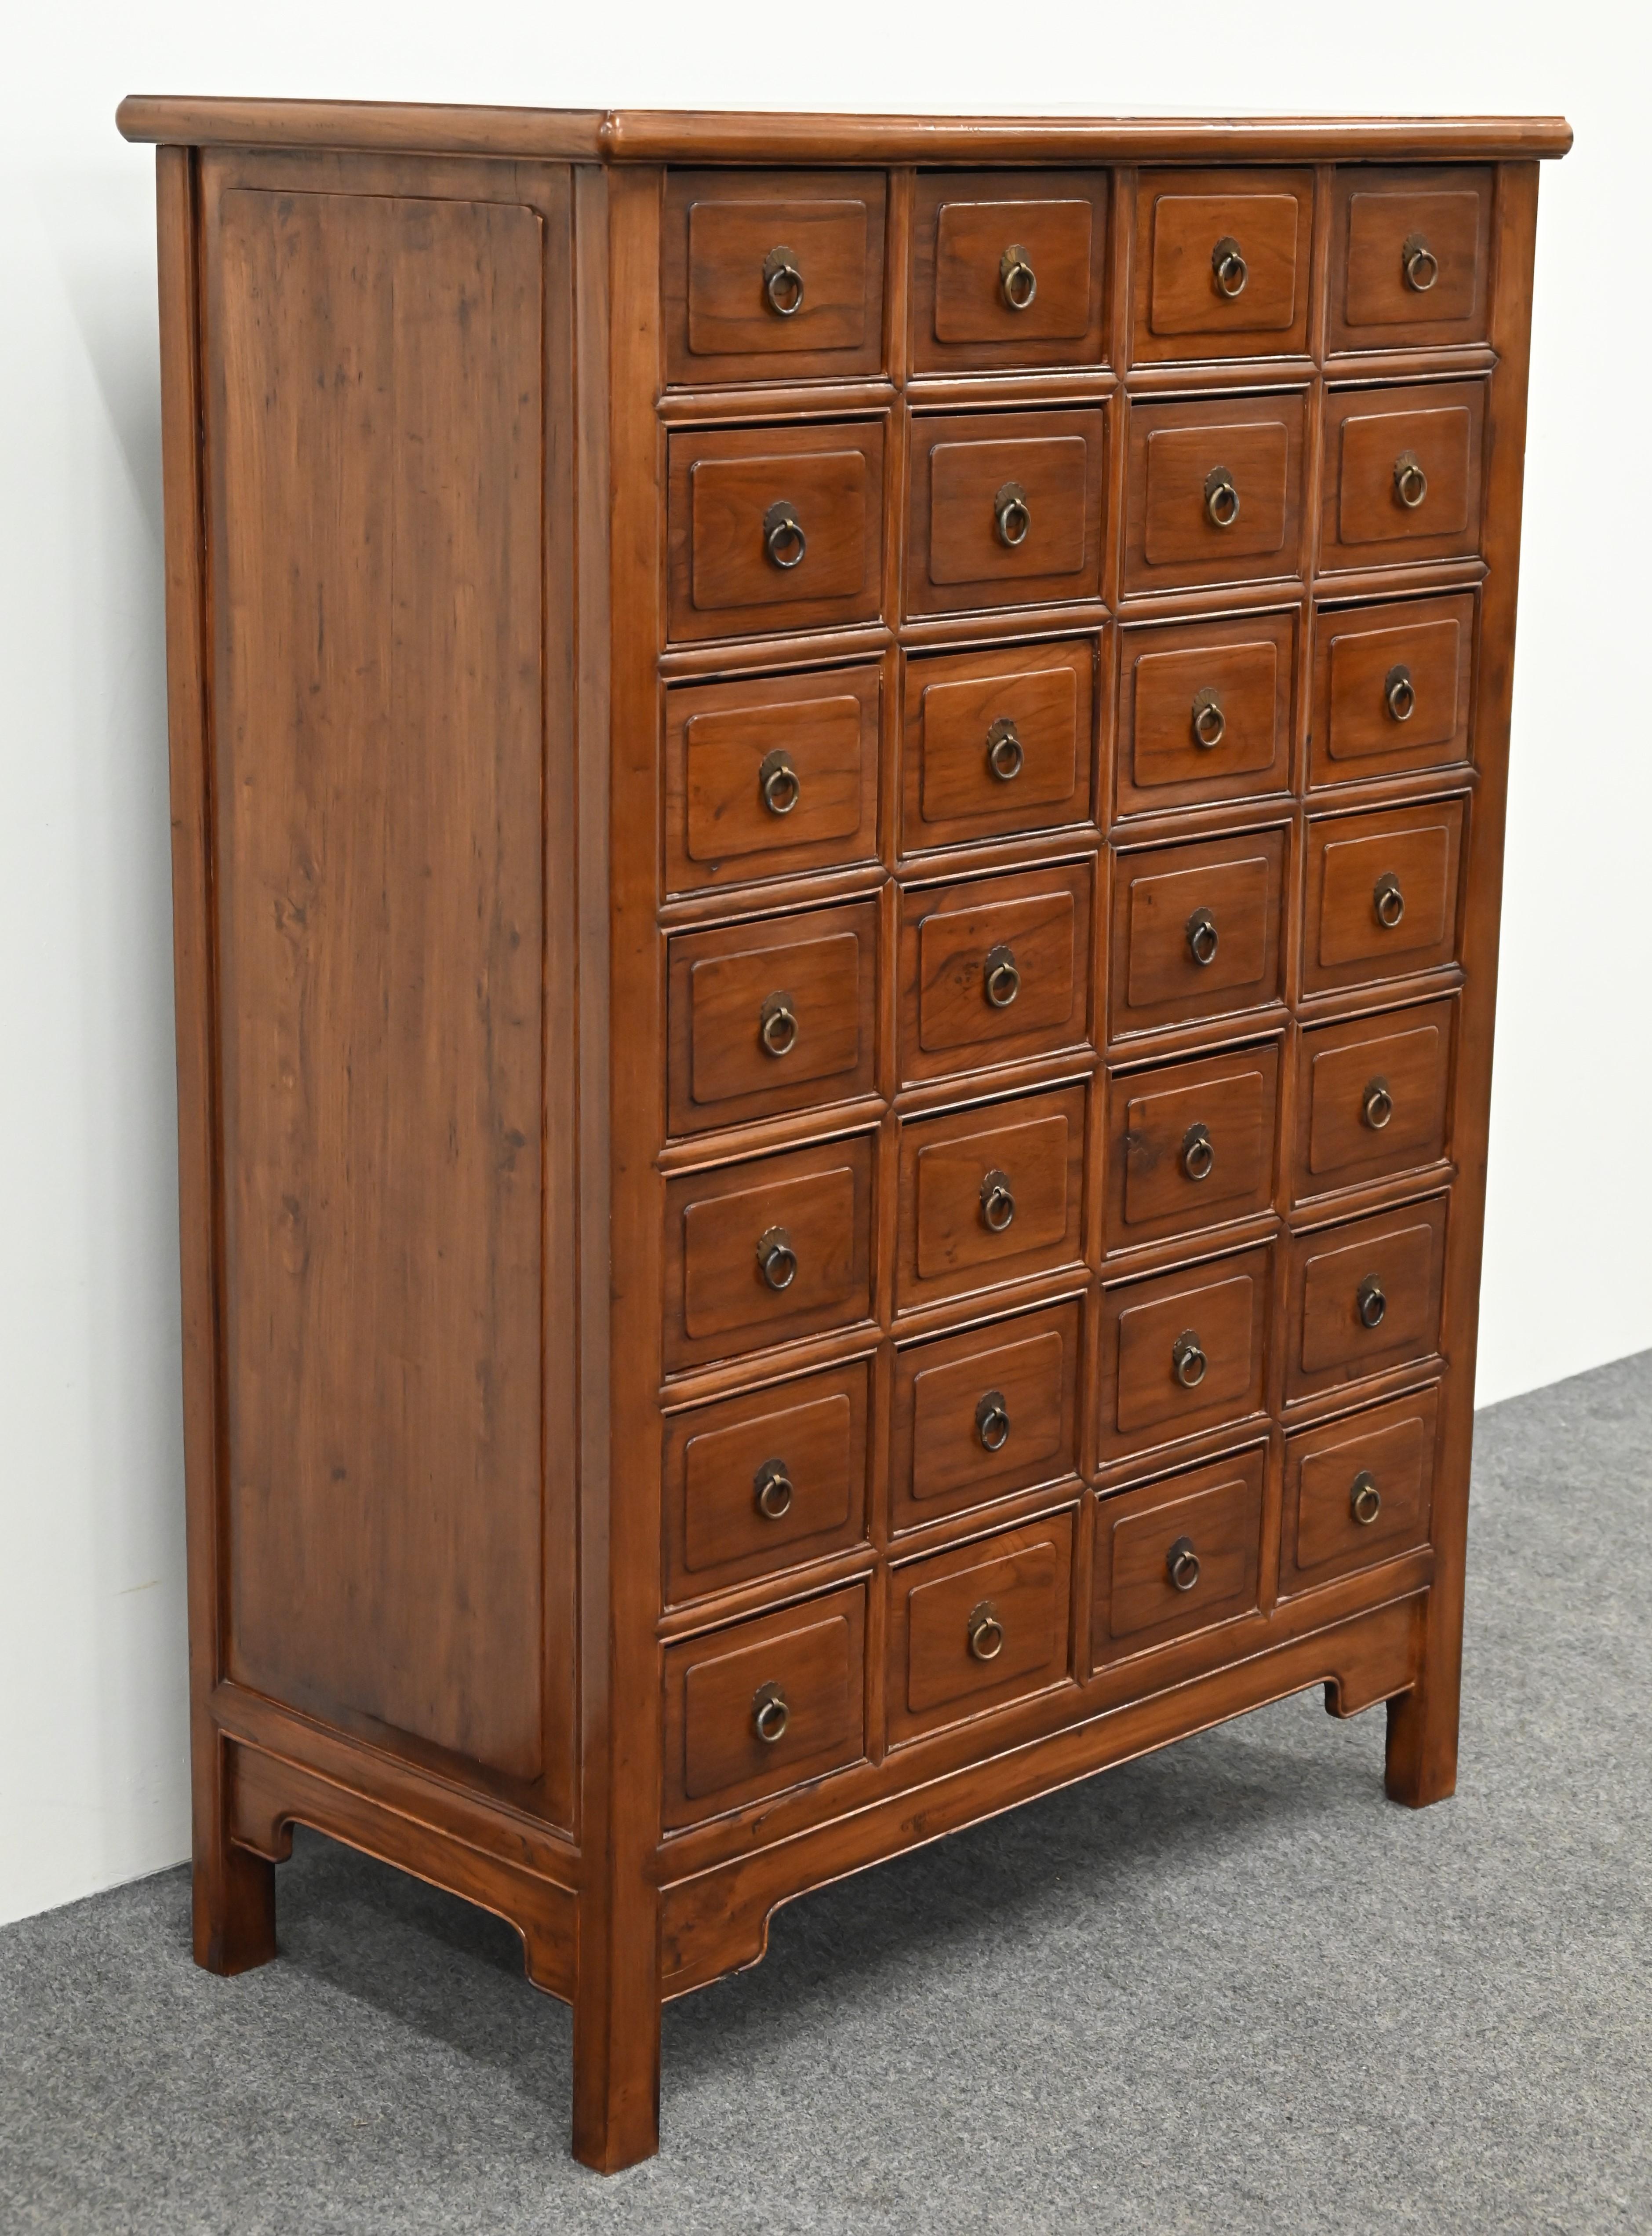 Chinese Apothecary Cabinet with 28 Drawers in Elmwood, 20th Century For Sale 9